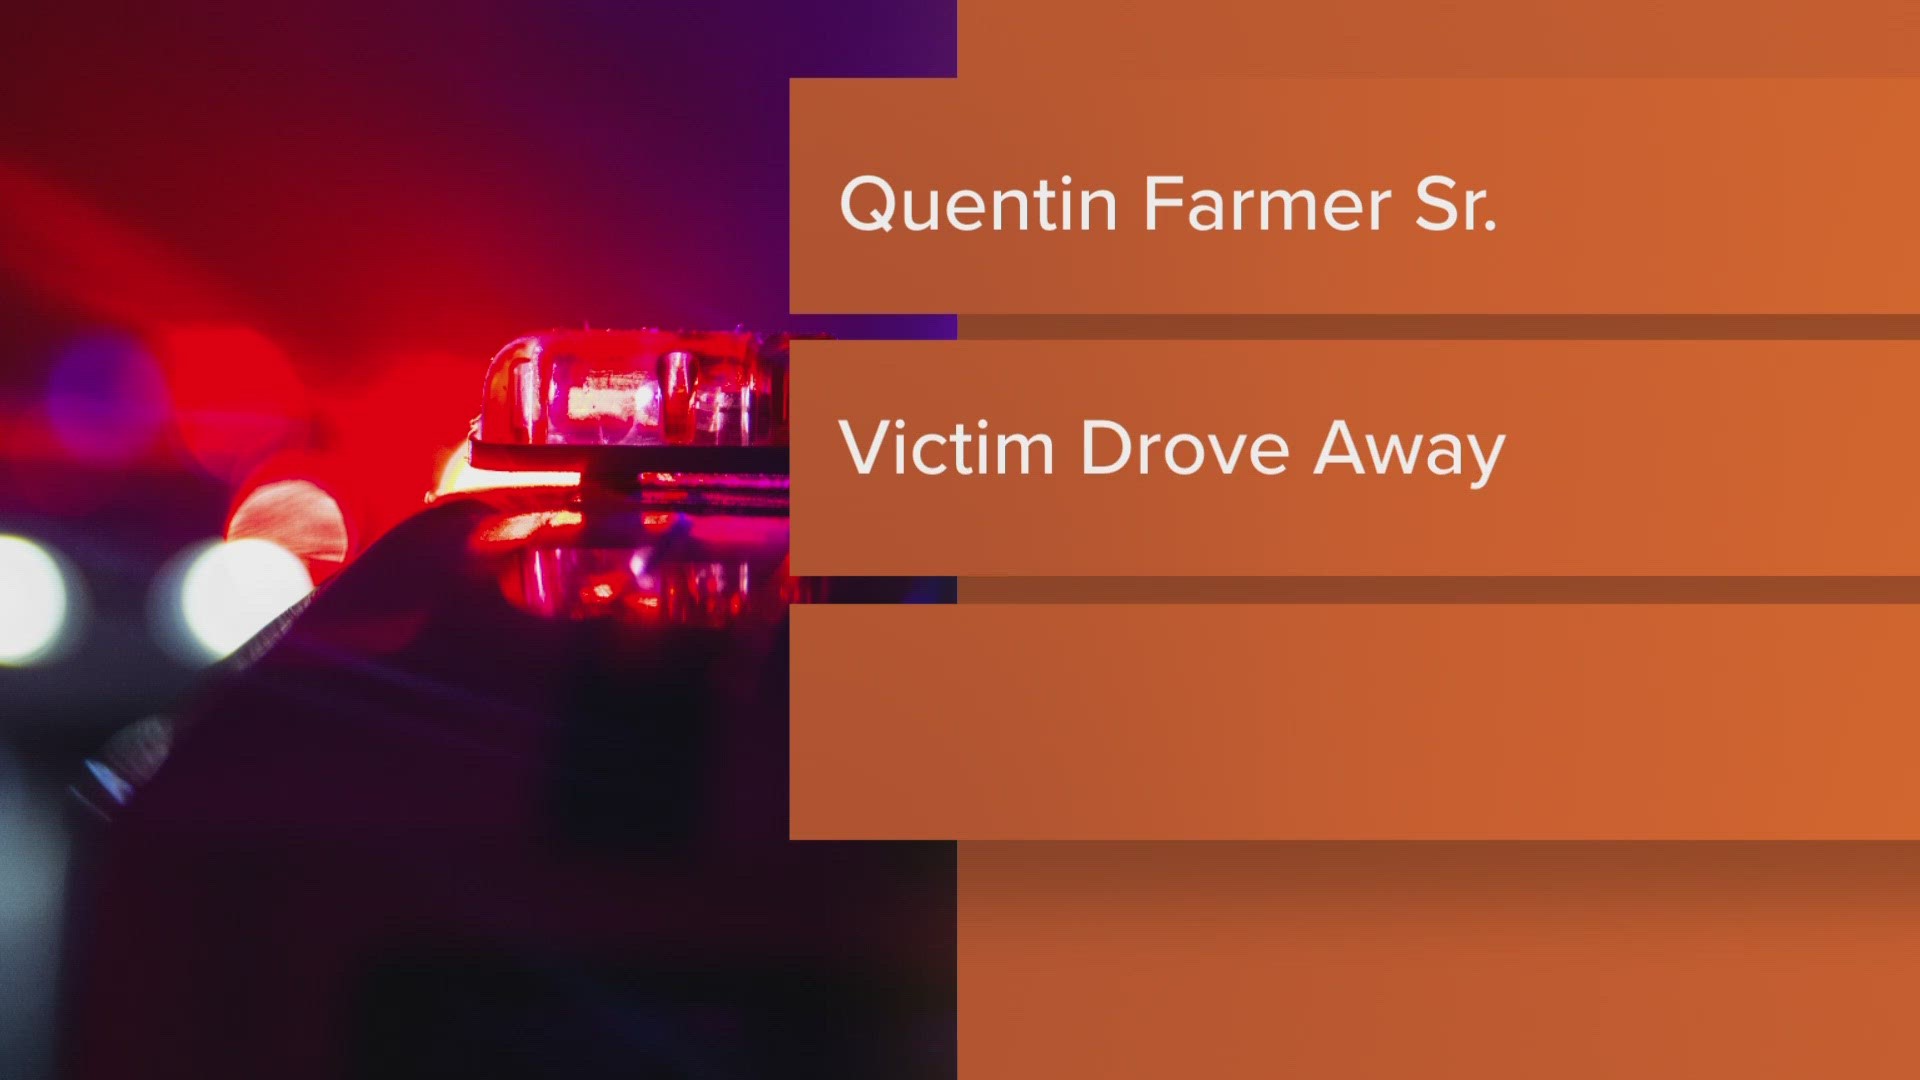 Witnesses told police the victim and 47-year-old Quentin R. Farmer, Sr. were arguing when Farmer pulled out a handgun from his waistband and started shooting.